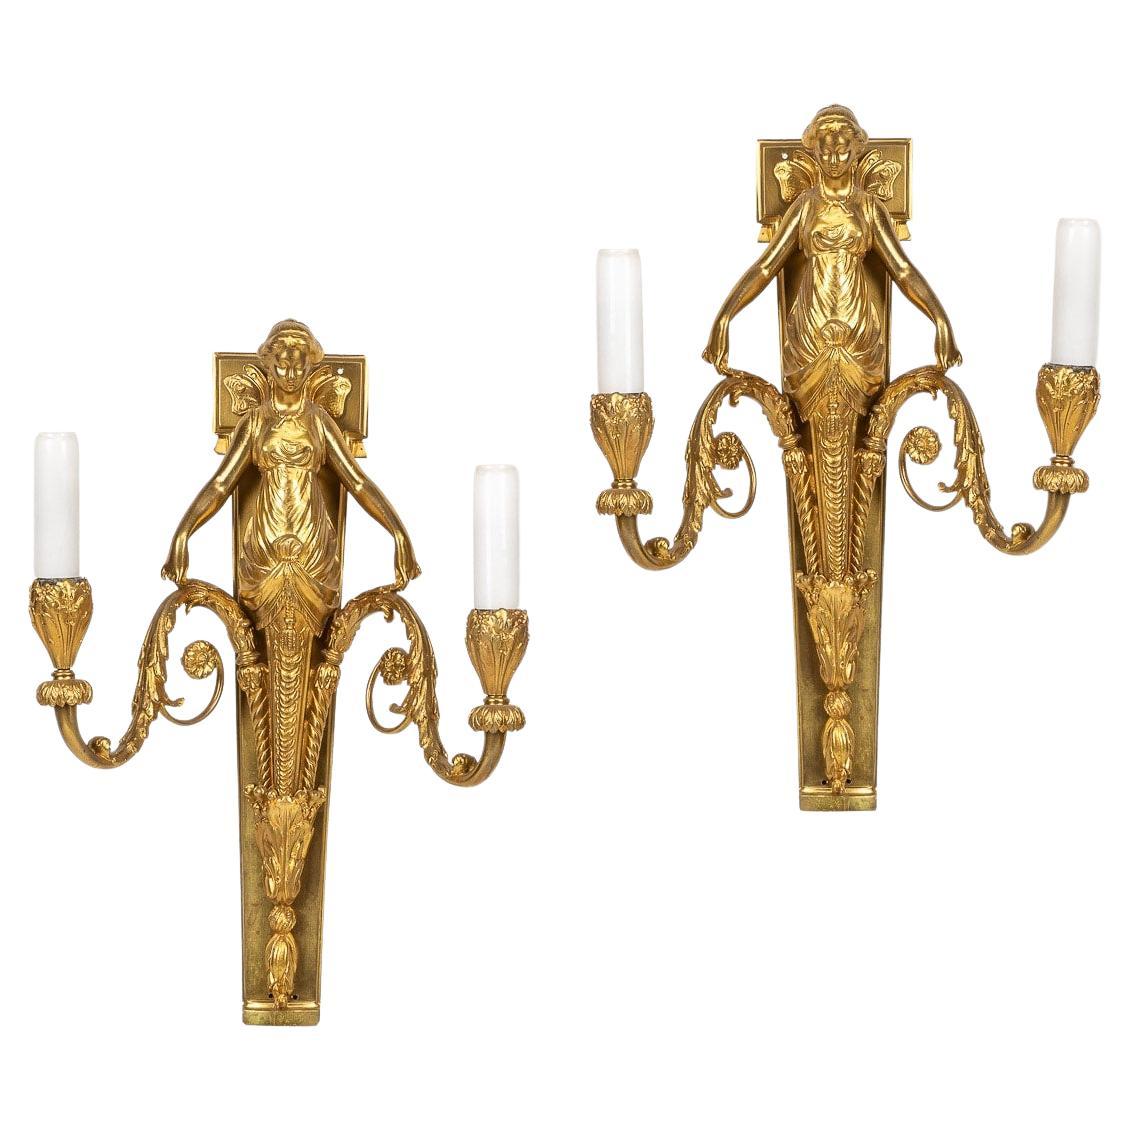 19th Century French Neoclassical Style Pair of Ormolu Gilt D'appliques, C.1870 For Sale